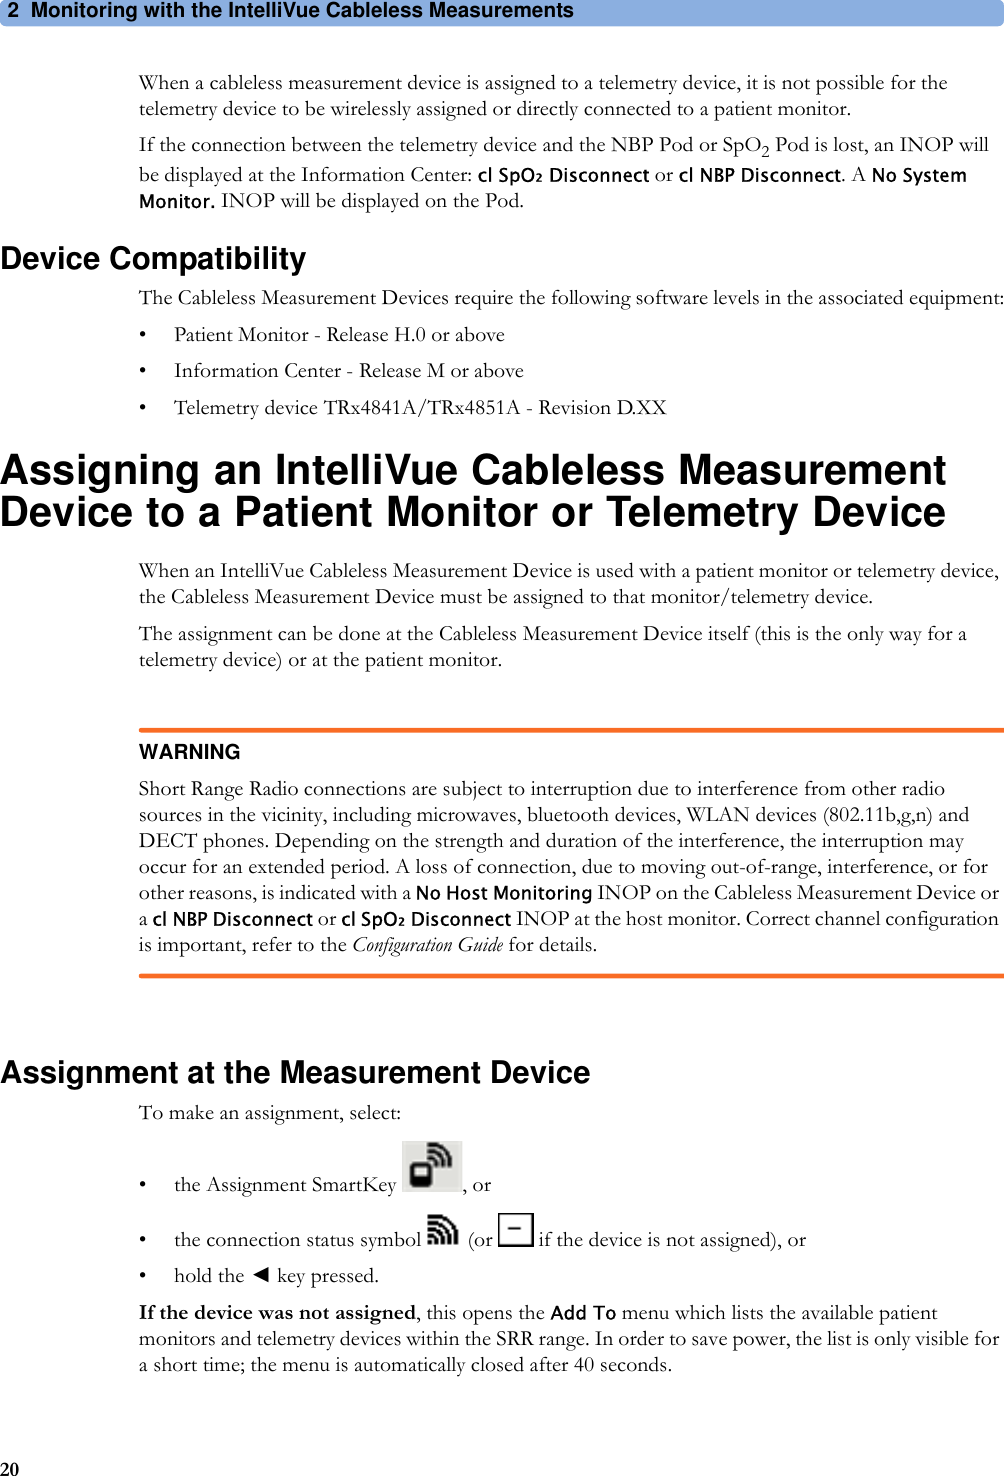 2 Monitoring with the IntelliVue Cableless Measurements20When a cableless measurement device is assigned to a telemetry device, it is not possible for the telemetry device to be wirelessly assigned or directly connected to a patient monitor.If the connection between the telemetry device and the NBP Pod or SpO2 Pod is lost, an INOP will be displayed at the Information Center: cl SpO₂ Disconnect or cl NBP Disconnect. A No System Monitor. INOP will be displayed on the Pod.Device CompatibilityThe Cableless Measurement Devices require the following software levels in the associated equipment:• Patient Monitor - Release H.0 or above• Information Center - Release M or above• Telemetry device TRx4841A/TRx4851A - Revision D.XXAssigning an IntelliVue Cableless Measurement Device to a Patient Monitor or Telemetry DeviceWhen an IntelliVue Cableless Measurement Device is used with a patient monitor or telemetry device, the Cableless Measurement Device must be assigned to that monitor/telemetry device.The assignment can be done at the Cableless Measurement Device itself (this is the only way for a telemetry device) or at the patient monitor.WARNINGShort Range Radio connections are subject to interruption due to interference from other radio sources in the vicinity, including microwaves, bluetooth devices, WLAN devices (802.11b,g,n) and DECT phones. Depending on the strength and duration of the interference, the interruption may occur for an extended period. A loss of connection, due to moving out-of-range, interference, or for other reasons, is indicated with a No Host Monitoring INOP on the Cableless Measurement Device or a cl NBP Disconnect or cl SpO₂ Disconnect INOP at the host monitor. Correct channel configuration is important, refer to the Configuration Guide for details.Assignment at the Measurement DeviceTo make an assignment, select:• the Assignment SmartKey  , or• the connection status symbol   (or   if the device is not assigned), or•hold the ◄key pressed.If the device was not assigned, this opens the Add To menu which lists the available patient monitors and telemetry devices within the SRR range. In order to save power, the list is only visible for a short time; the menu is automatically closed after 40 seconds.